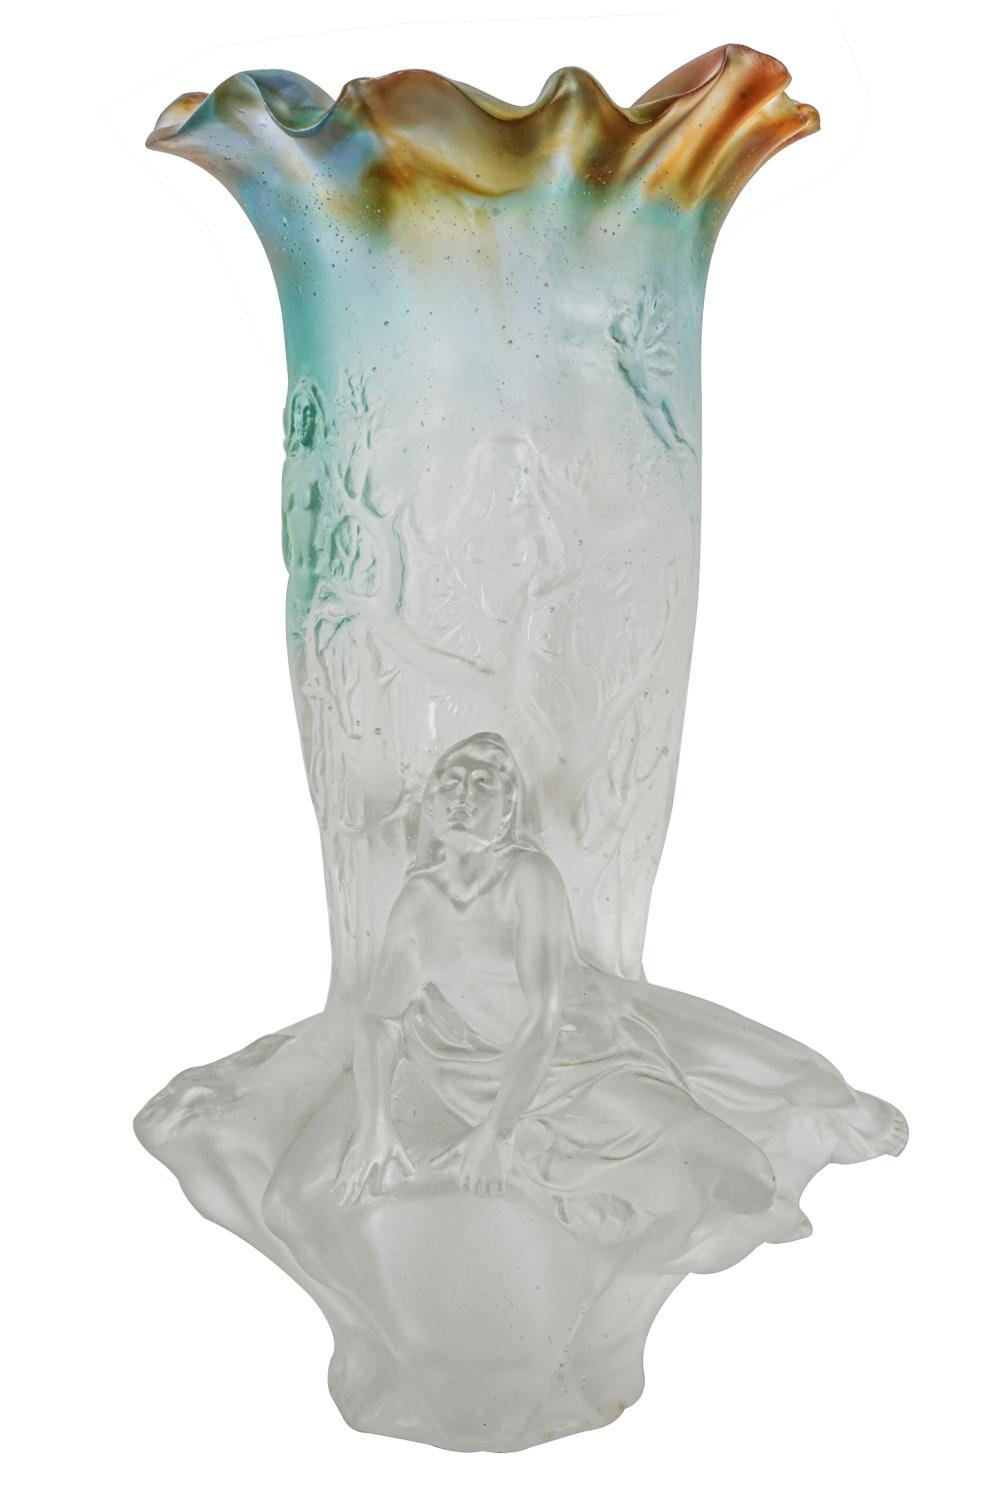 FRENCH MOLDED GLASS FIGURAL VASEunsigned,